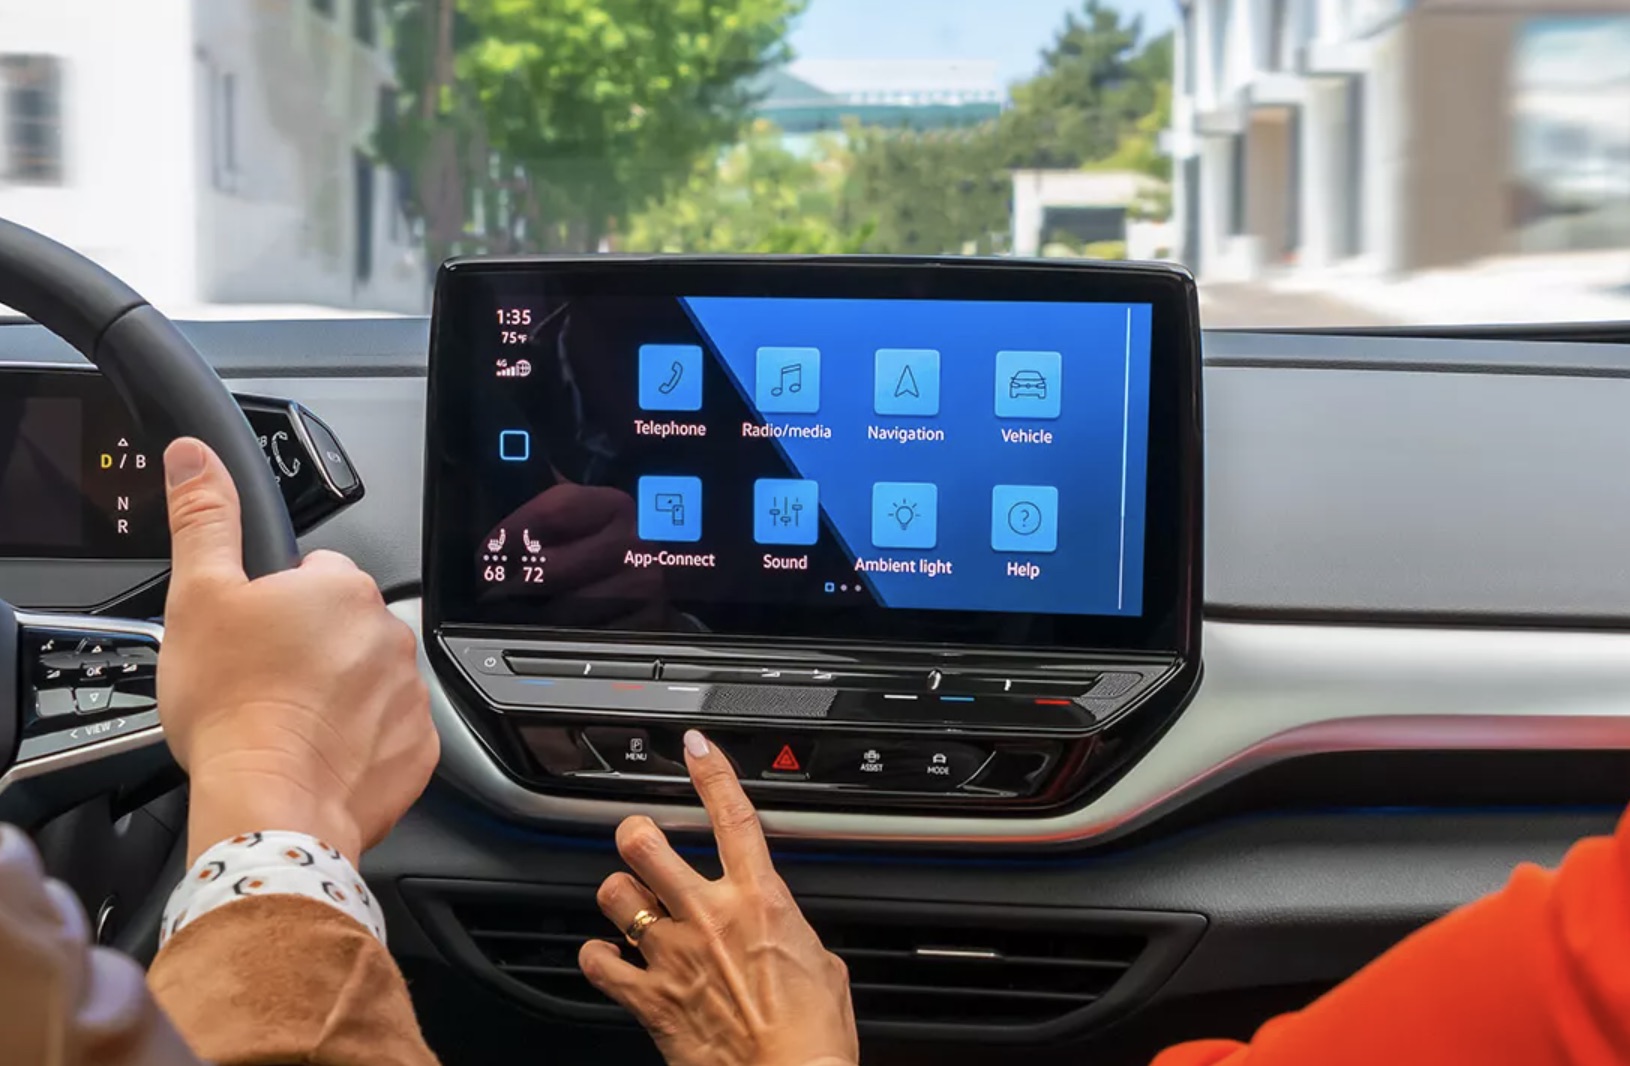 Volkswagen navigation system being used by the man and woman inside the vehicle.